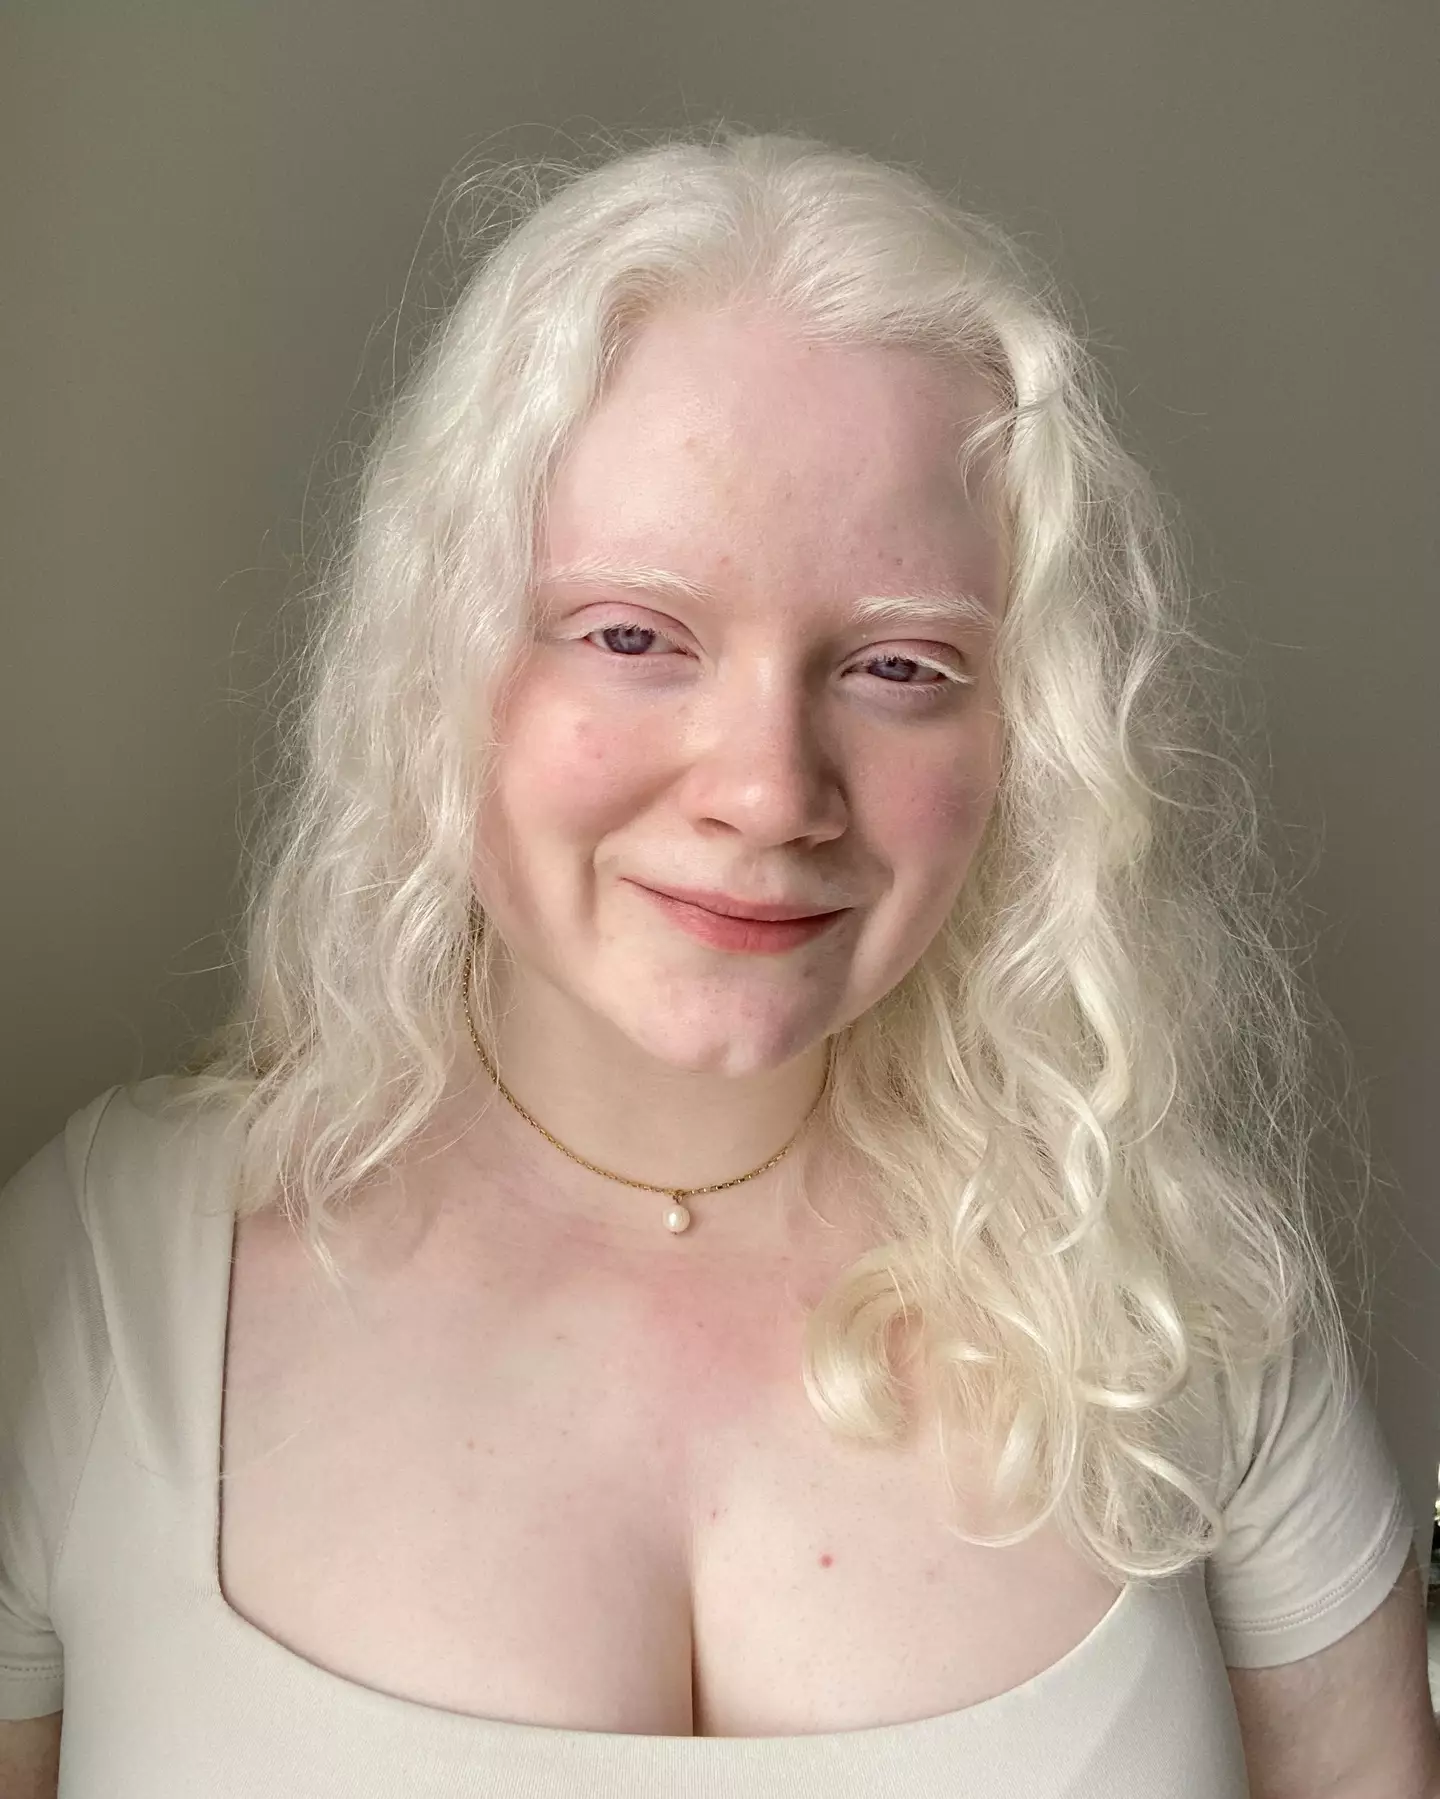 Oceanne Comtois was born with albinism.